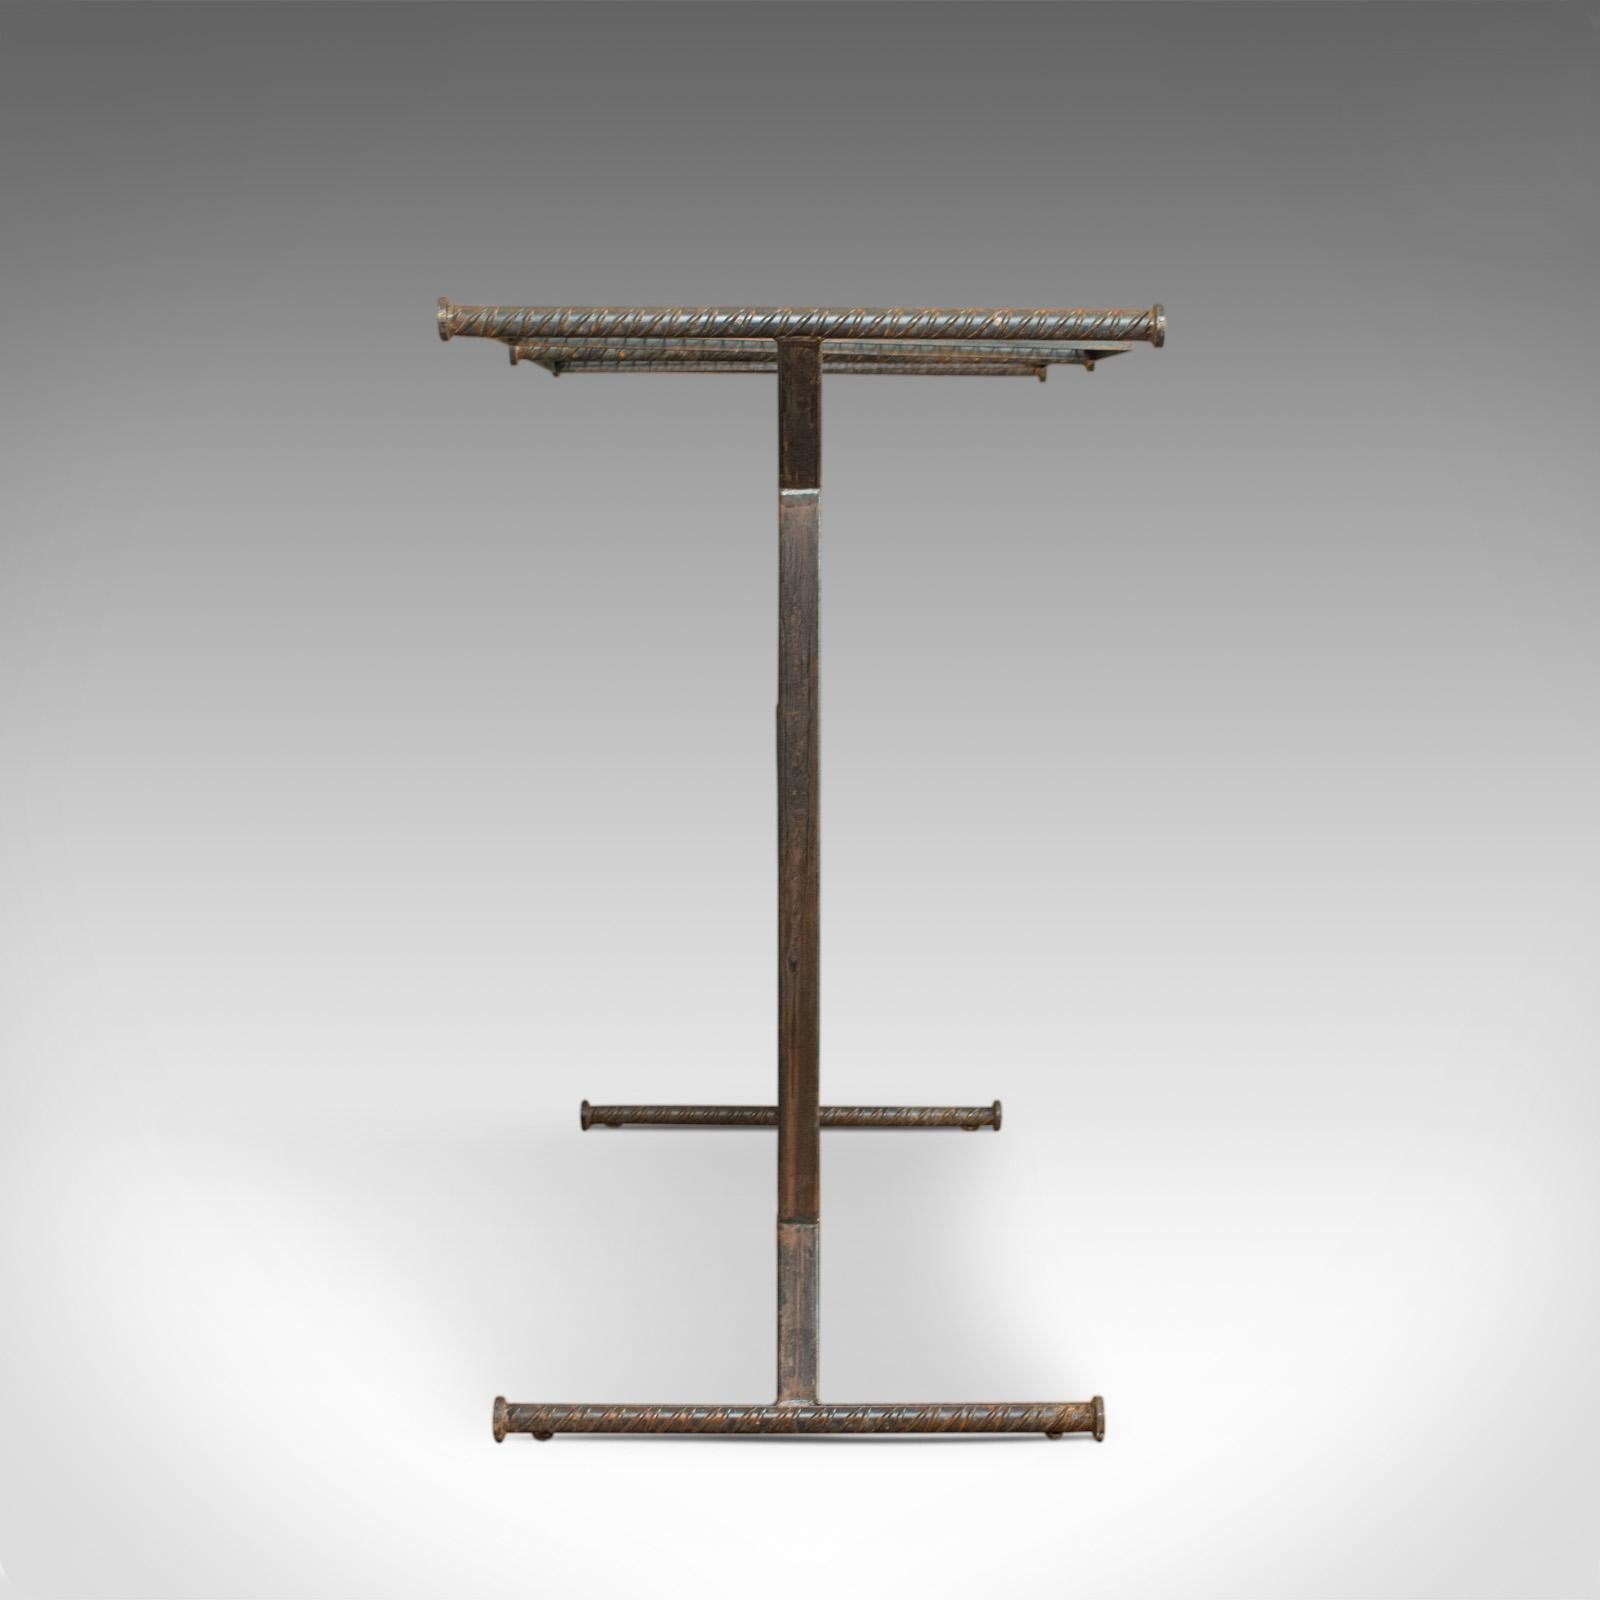 This is a vintage clothes hanging rail. An English, steel and oak retail display stand in industrial taste, dating to the 20th century.

Steel and select cuts of oak in strong industrial taste
Dark hues throughout and displaying a desirable aged